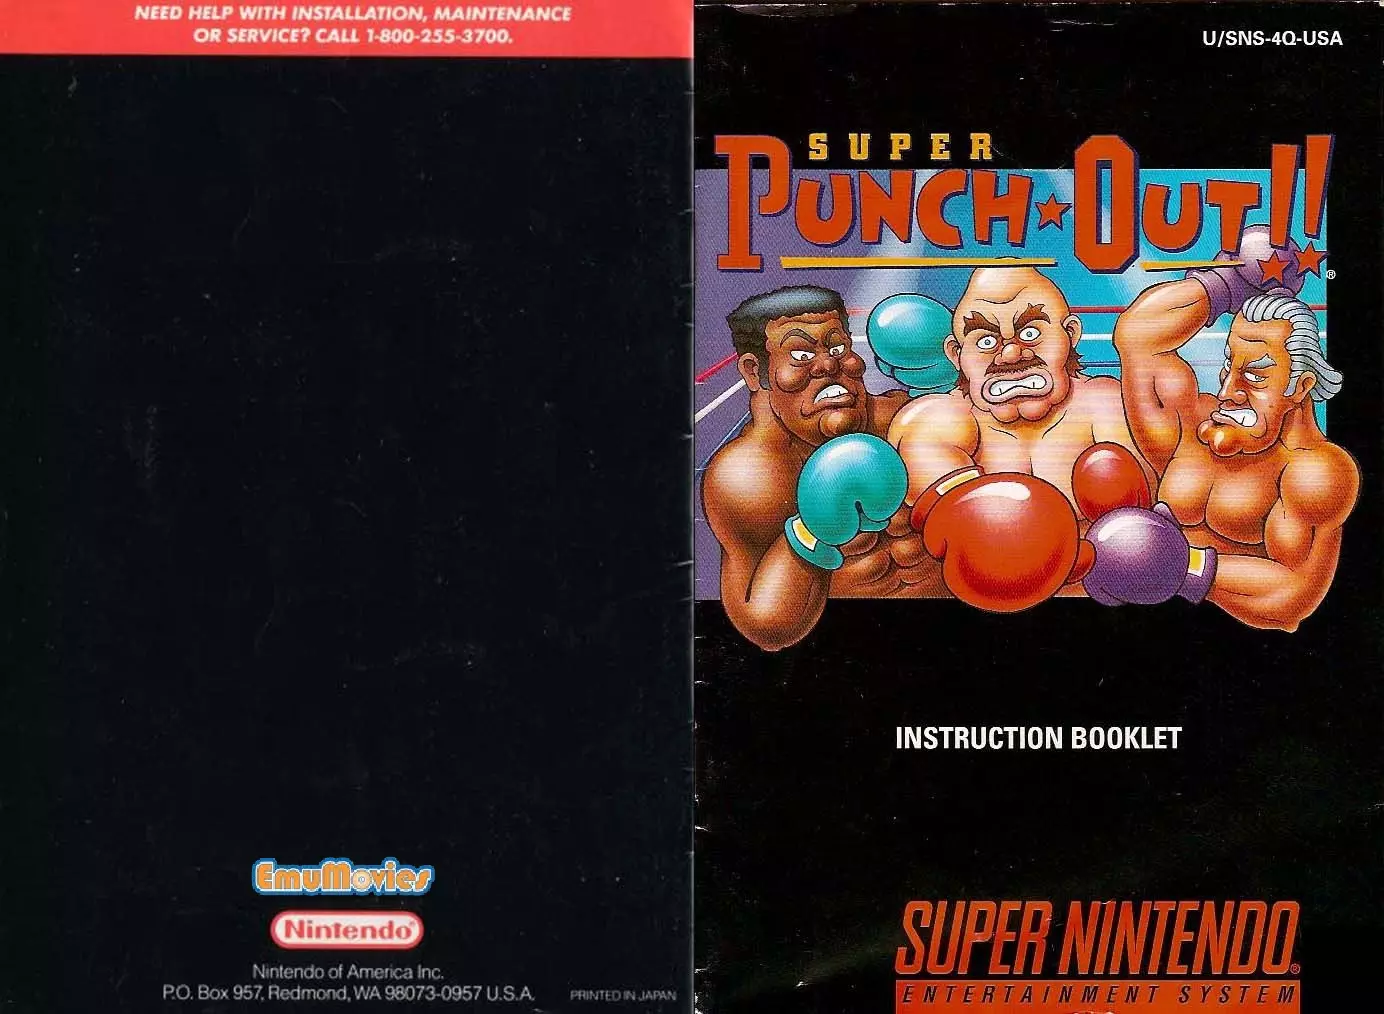 manual for Super Punch-Out!!